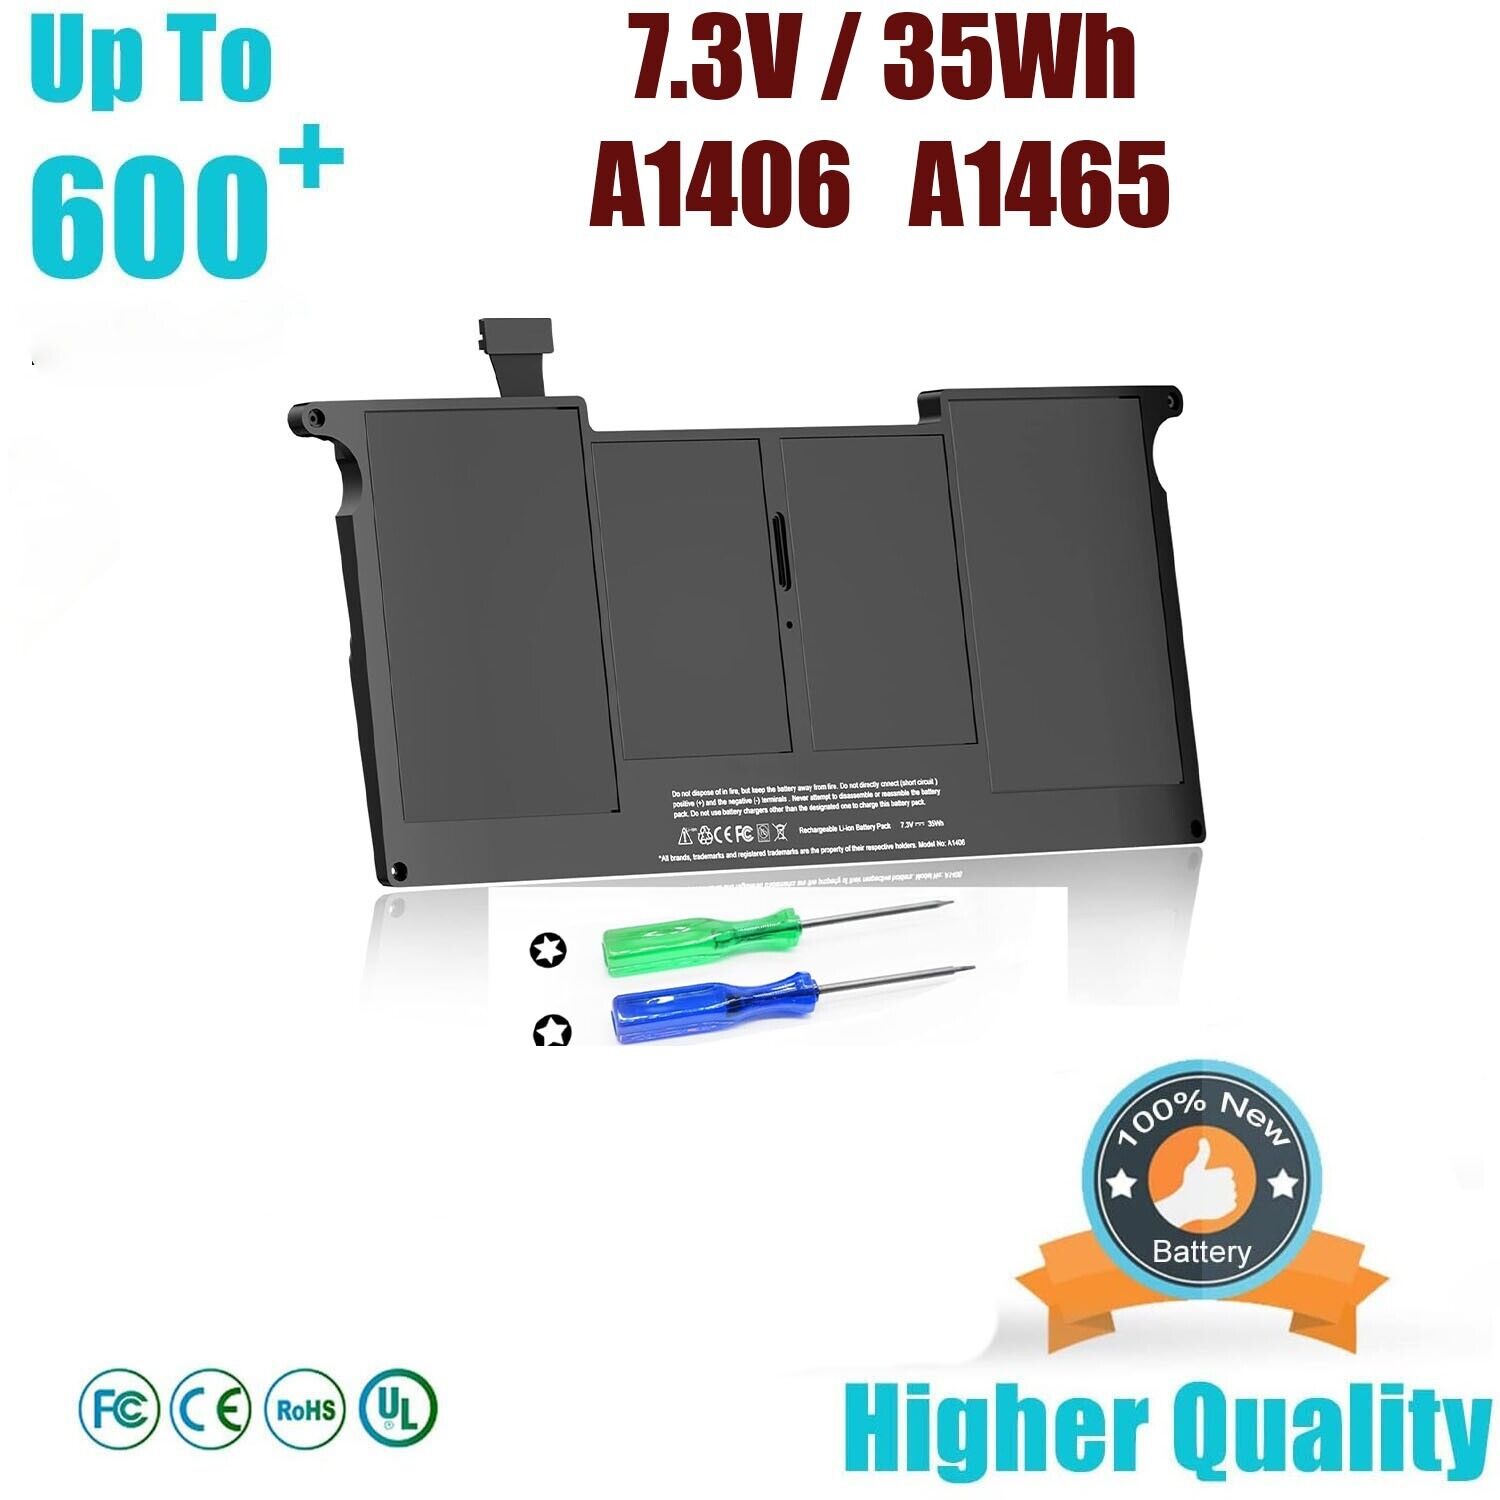 A1406 A1495 Battery for MacBook Air 11 inch Mid 2012 2013 Early 2014 2015 A1465